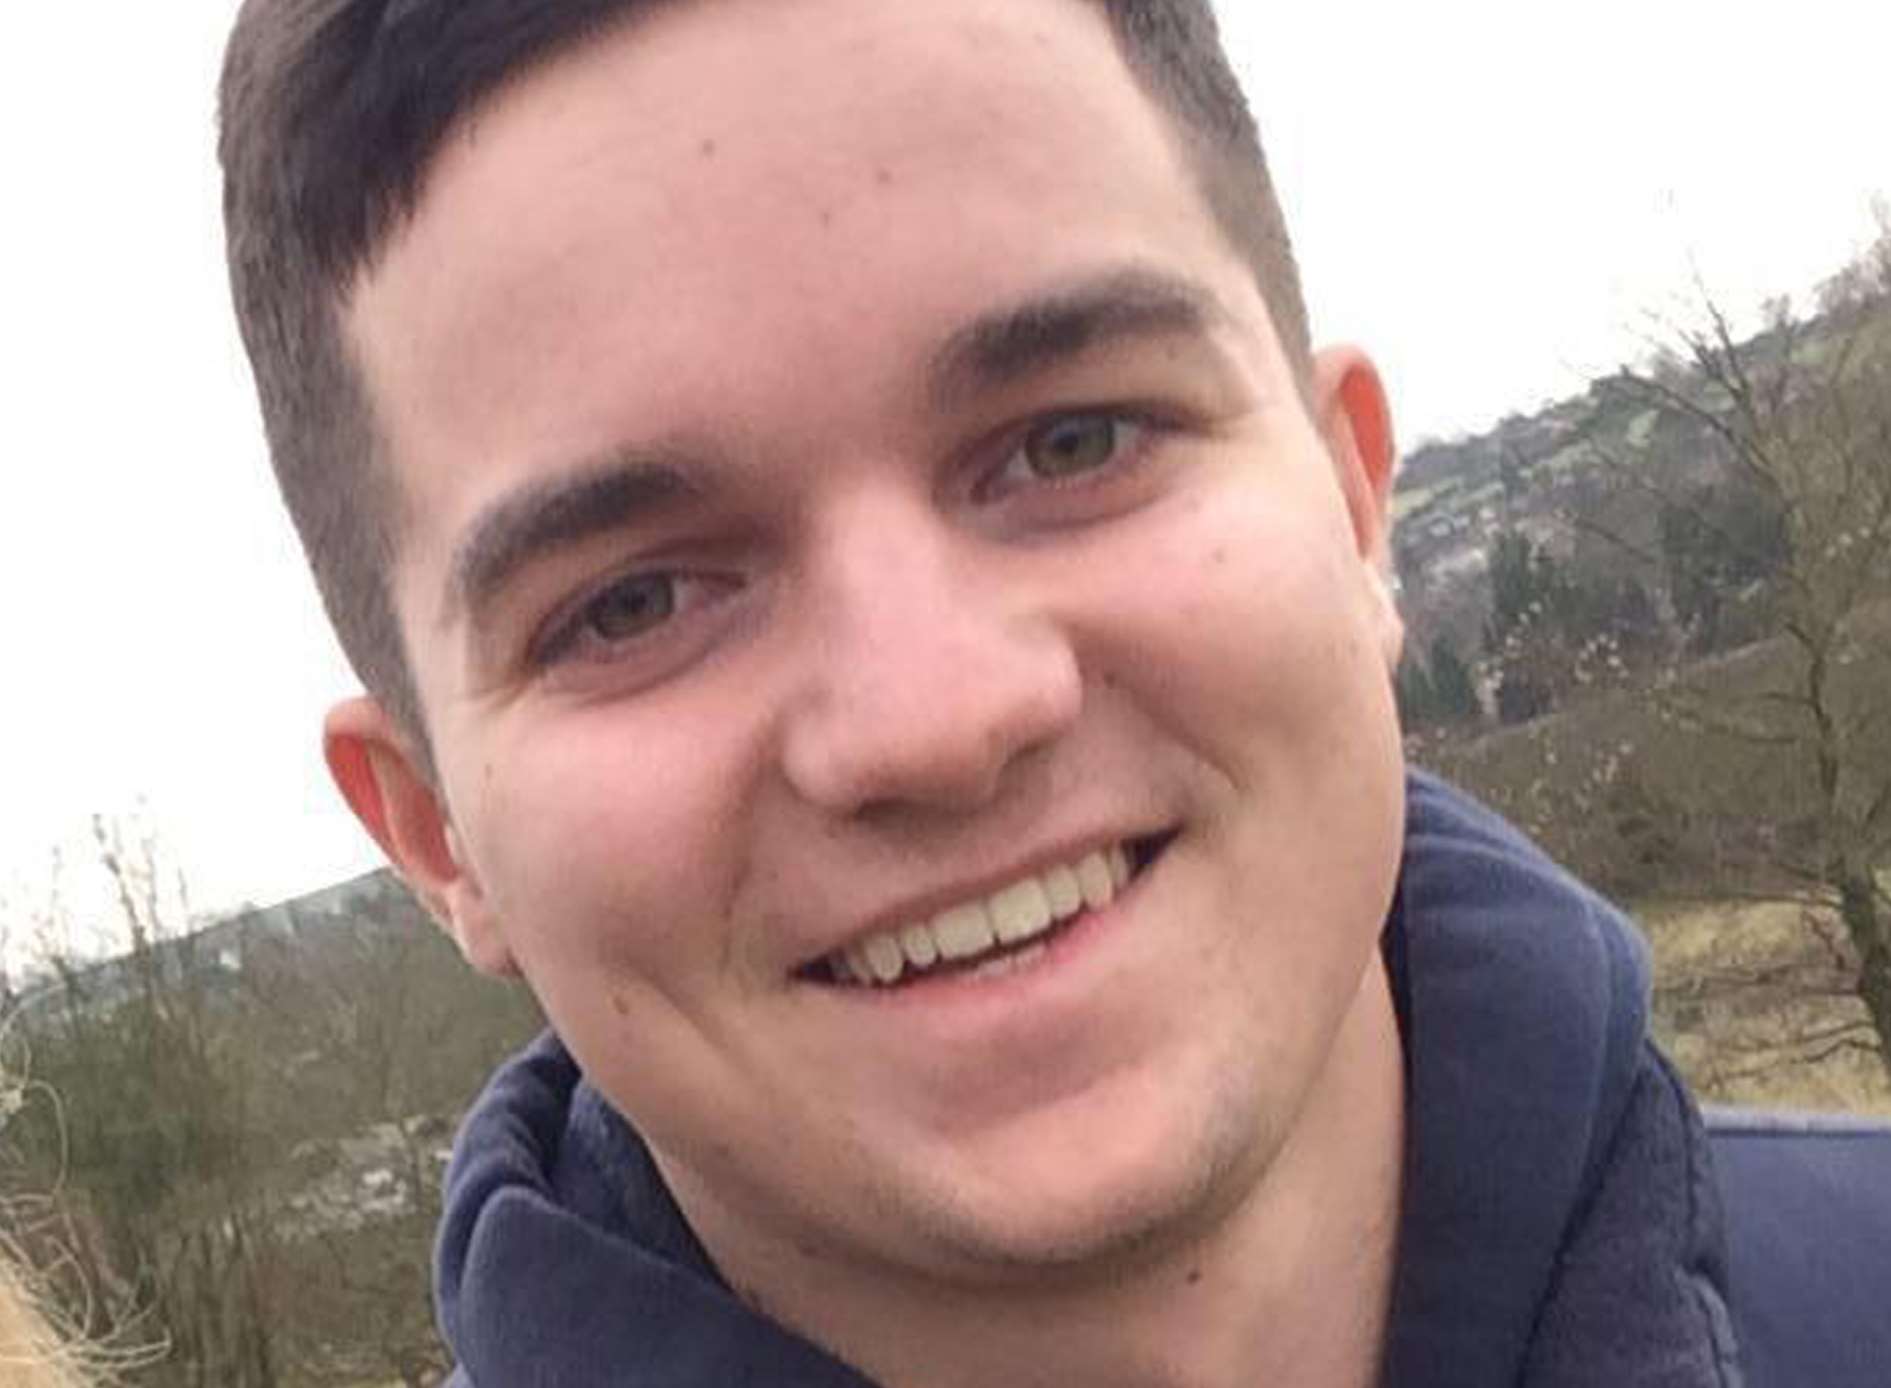 Jack Thompson, 20, chased his victim through the town centre